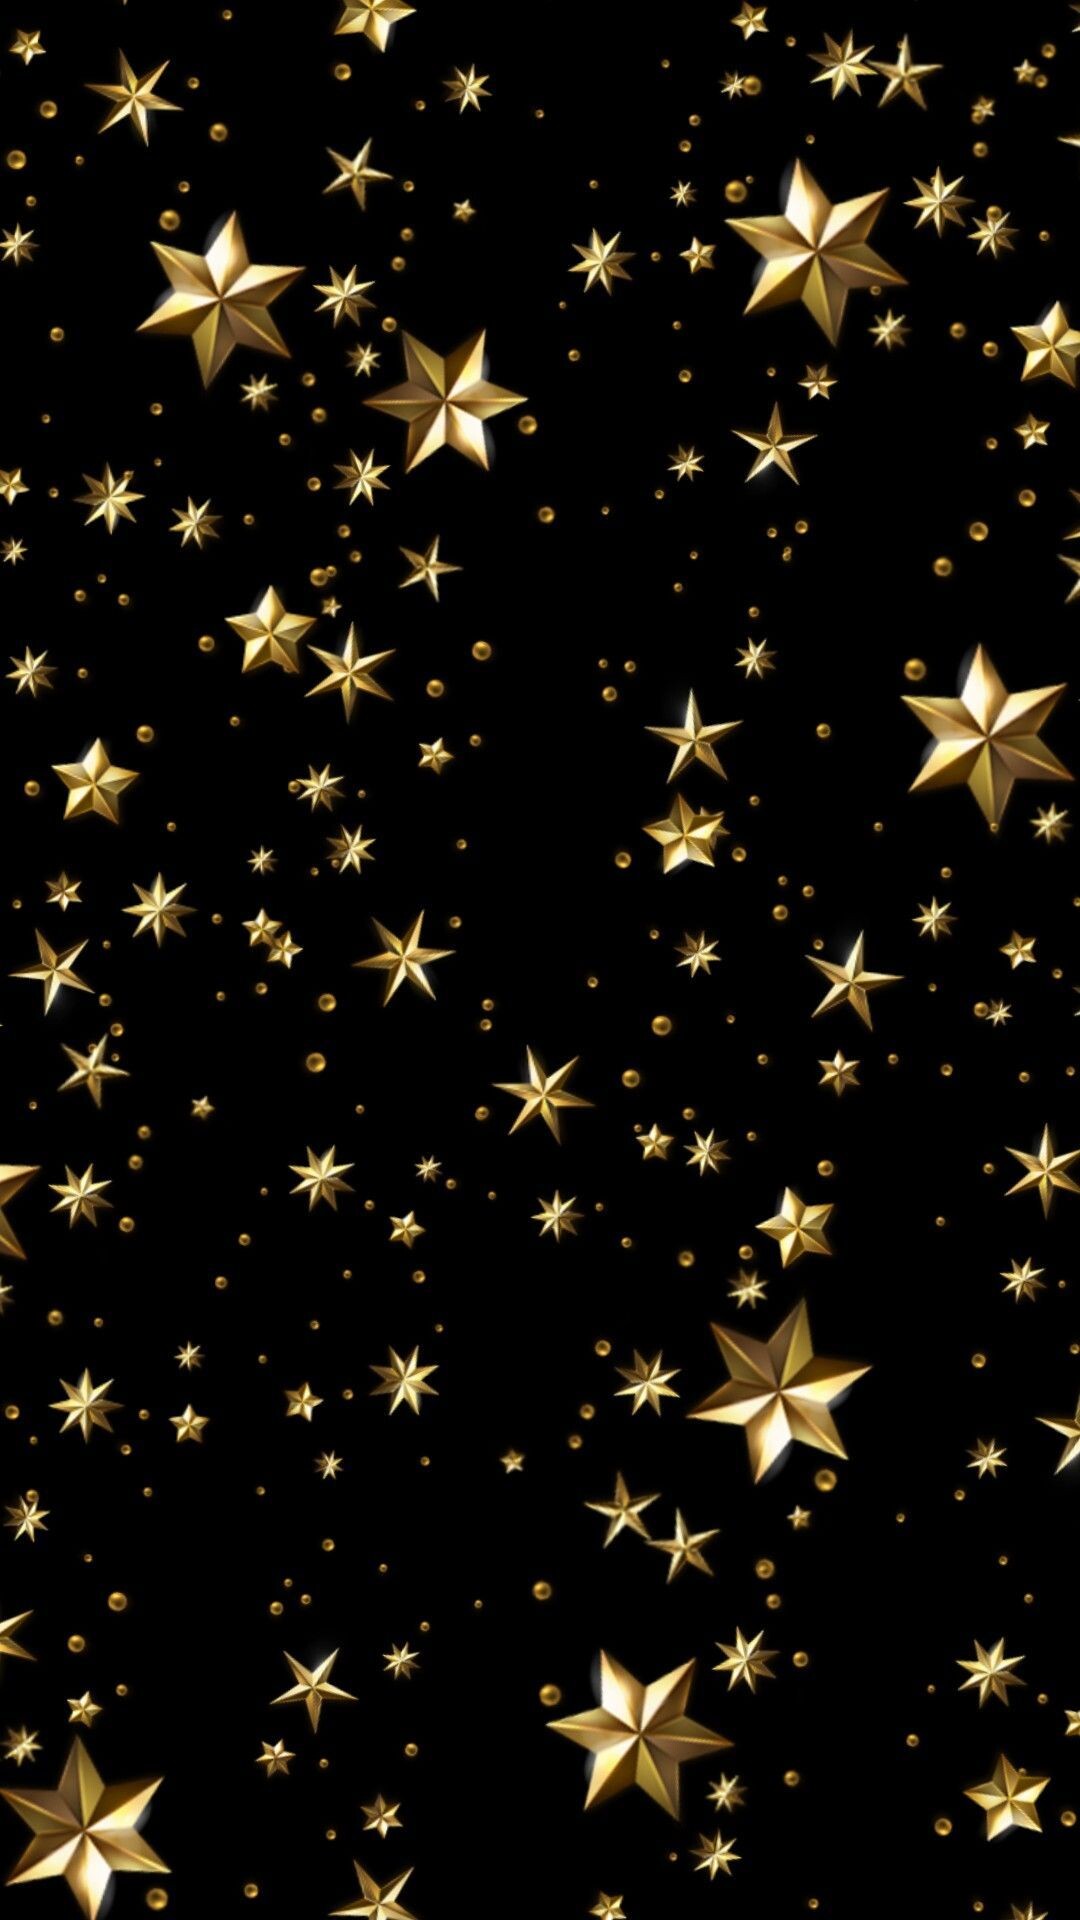 Gold Star: Six pointed stars, Gold geometric star ornaments, Astronomical object. 1080x1920 Full HD Background.